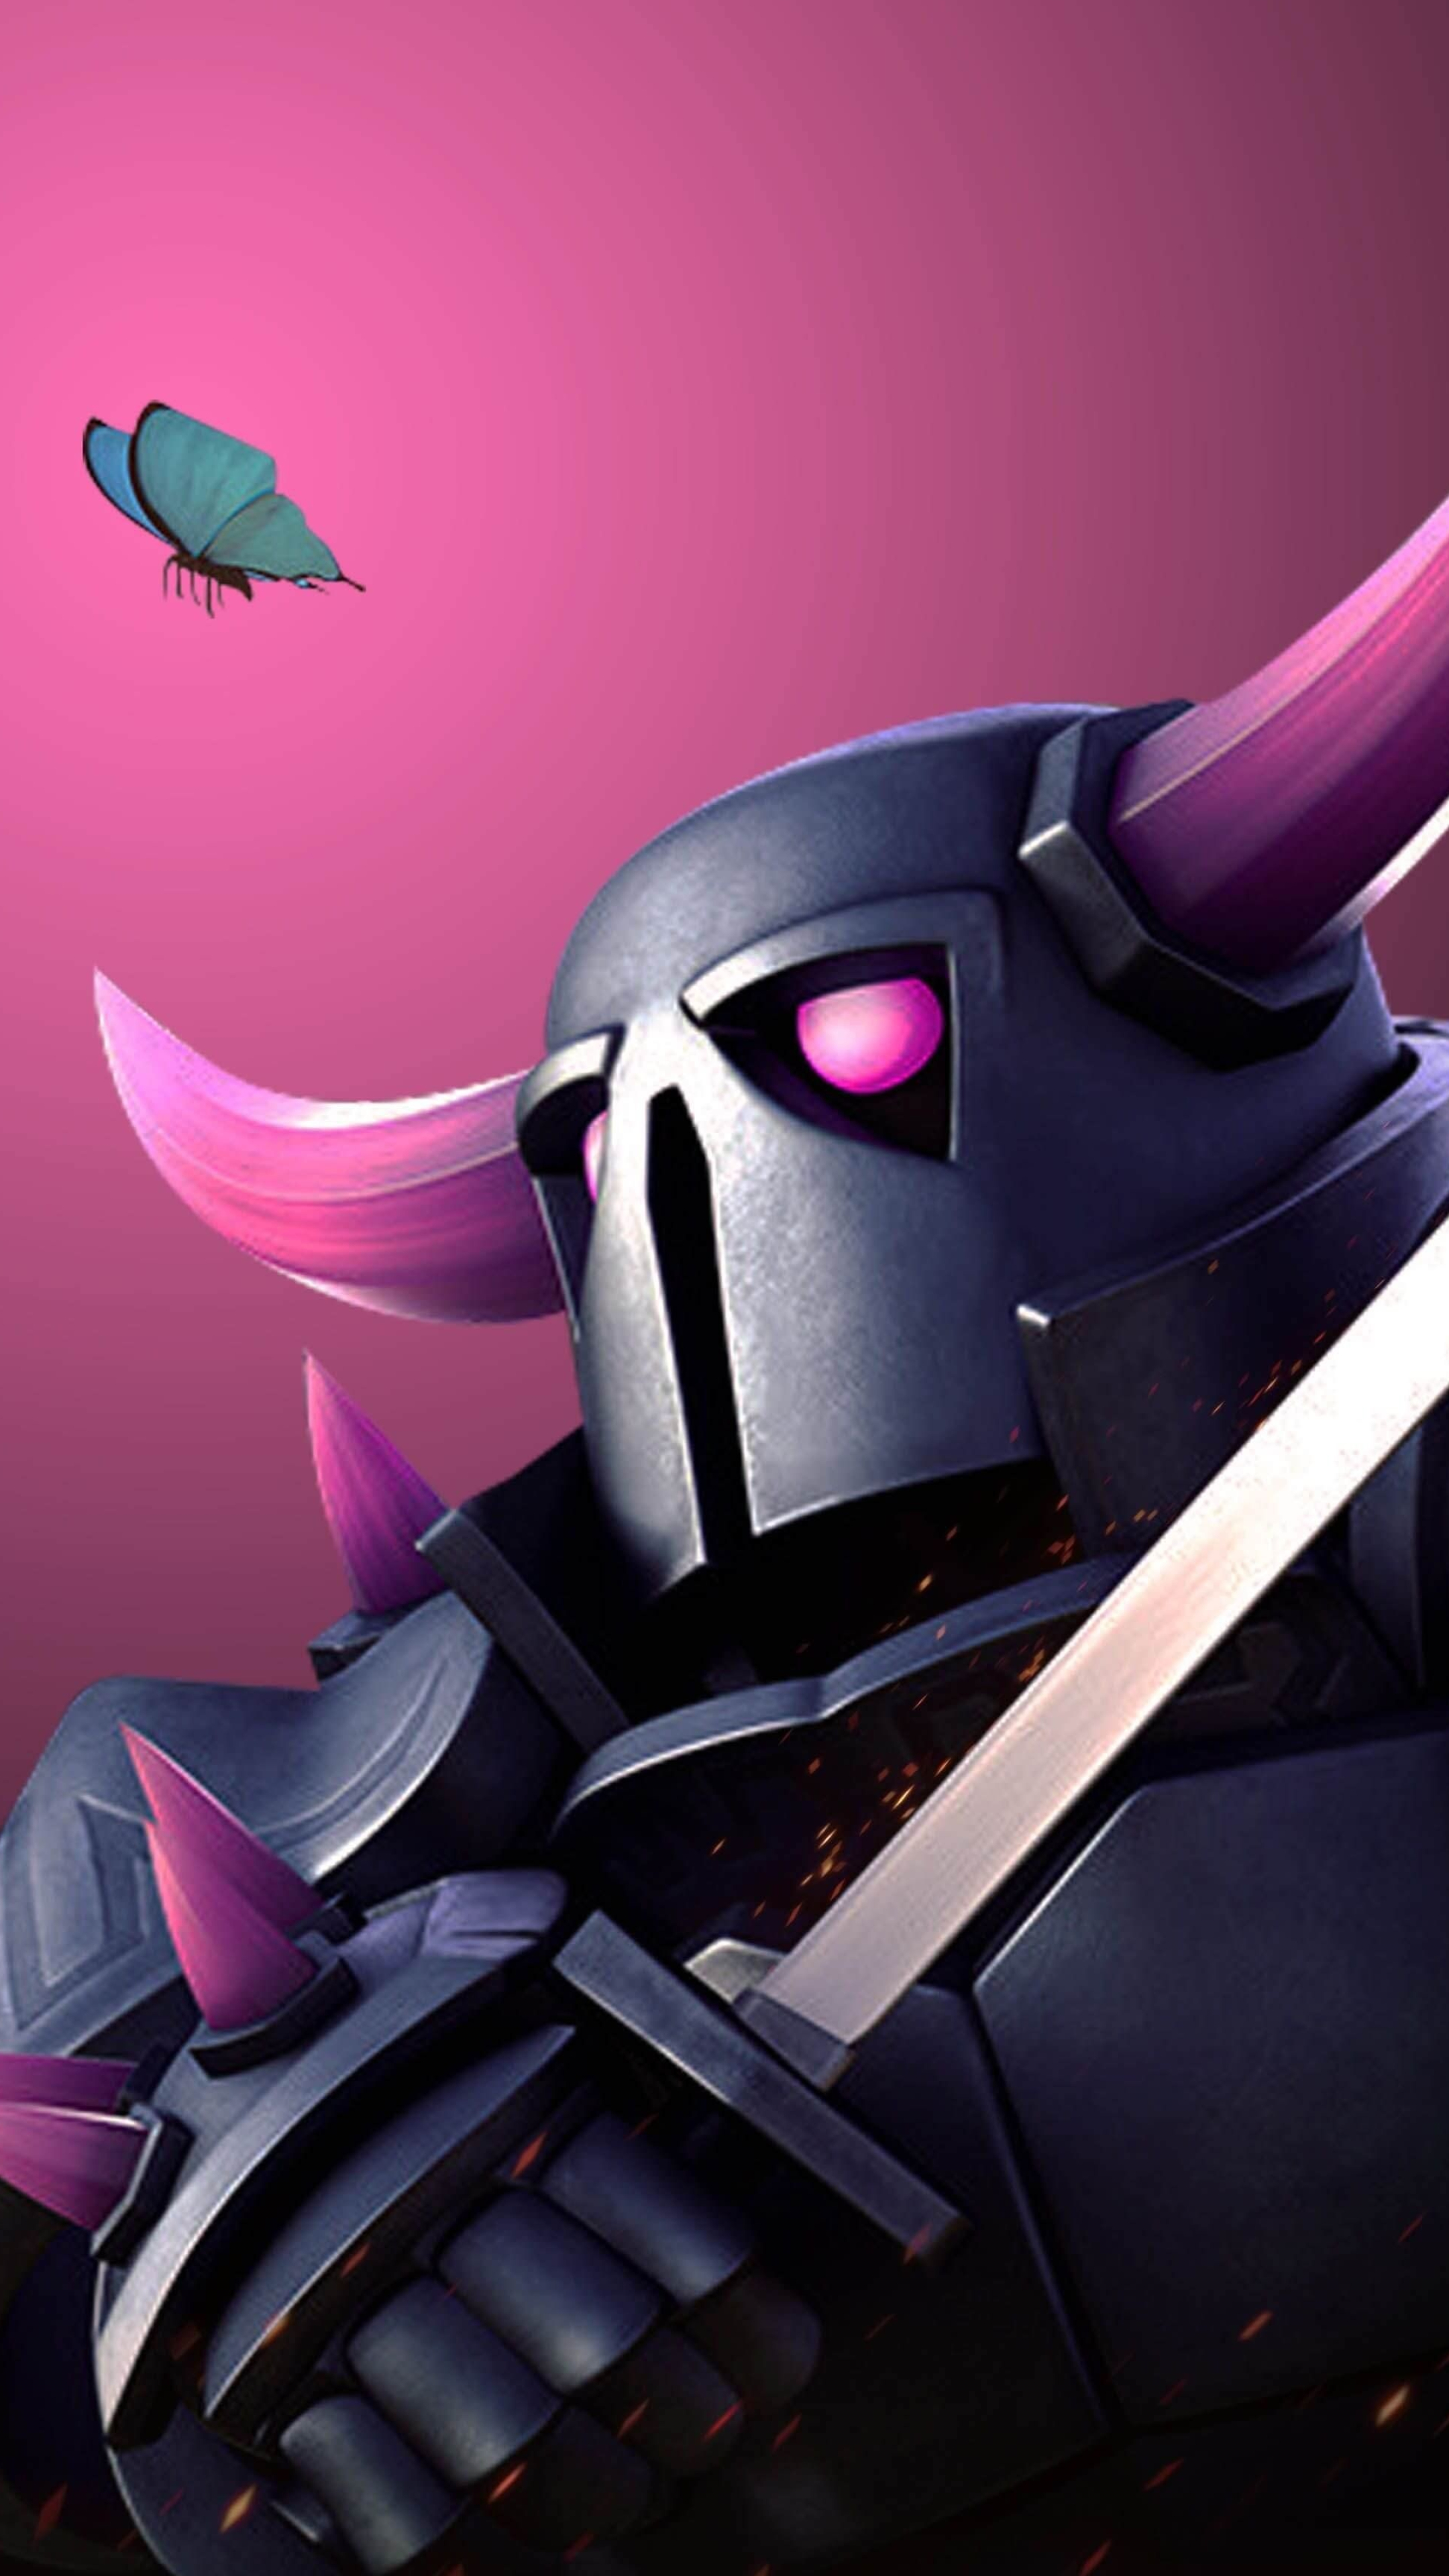 HD wallpaper, 2160X3840 4K Phone, Mobile 4K Clash Of Clans Background, Destructive Force, Formidable Warrior, Clash Of Clans Pekka, Unstoppable Might